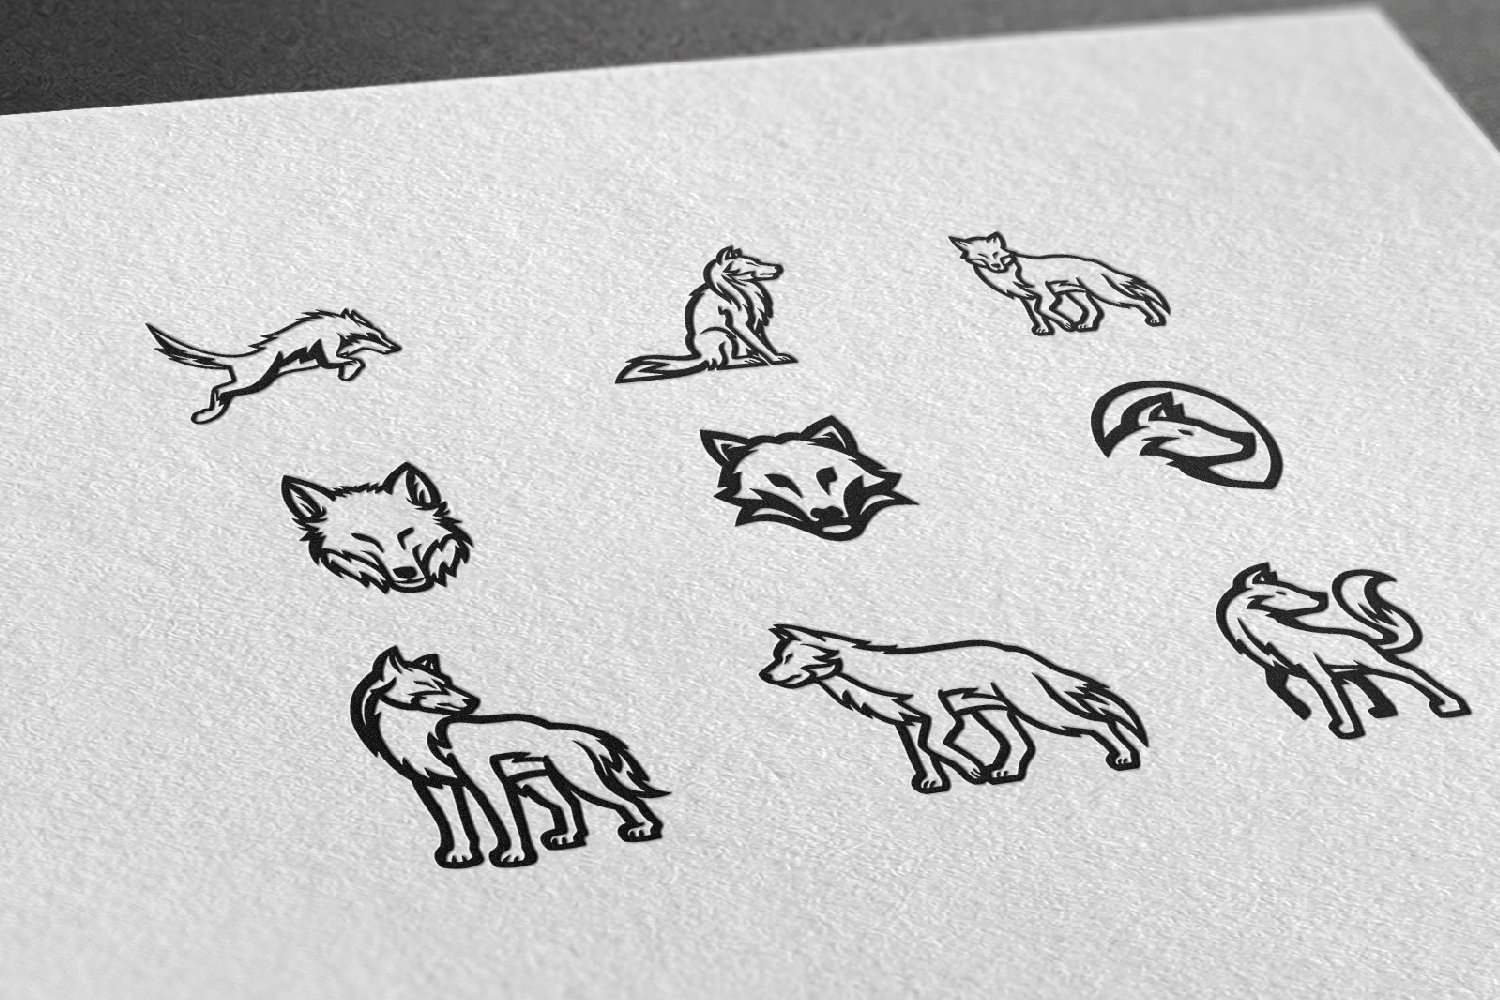 Fox logos printed on the paper.